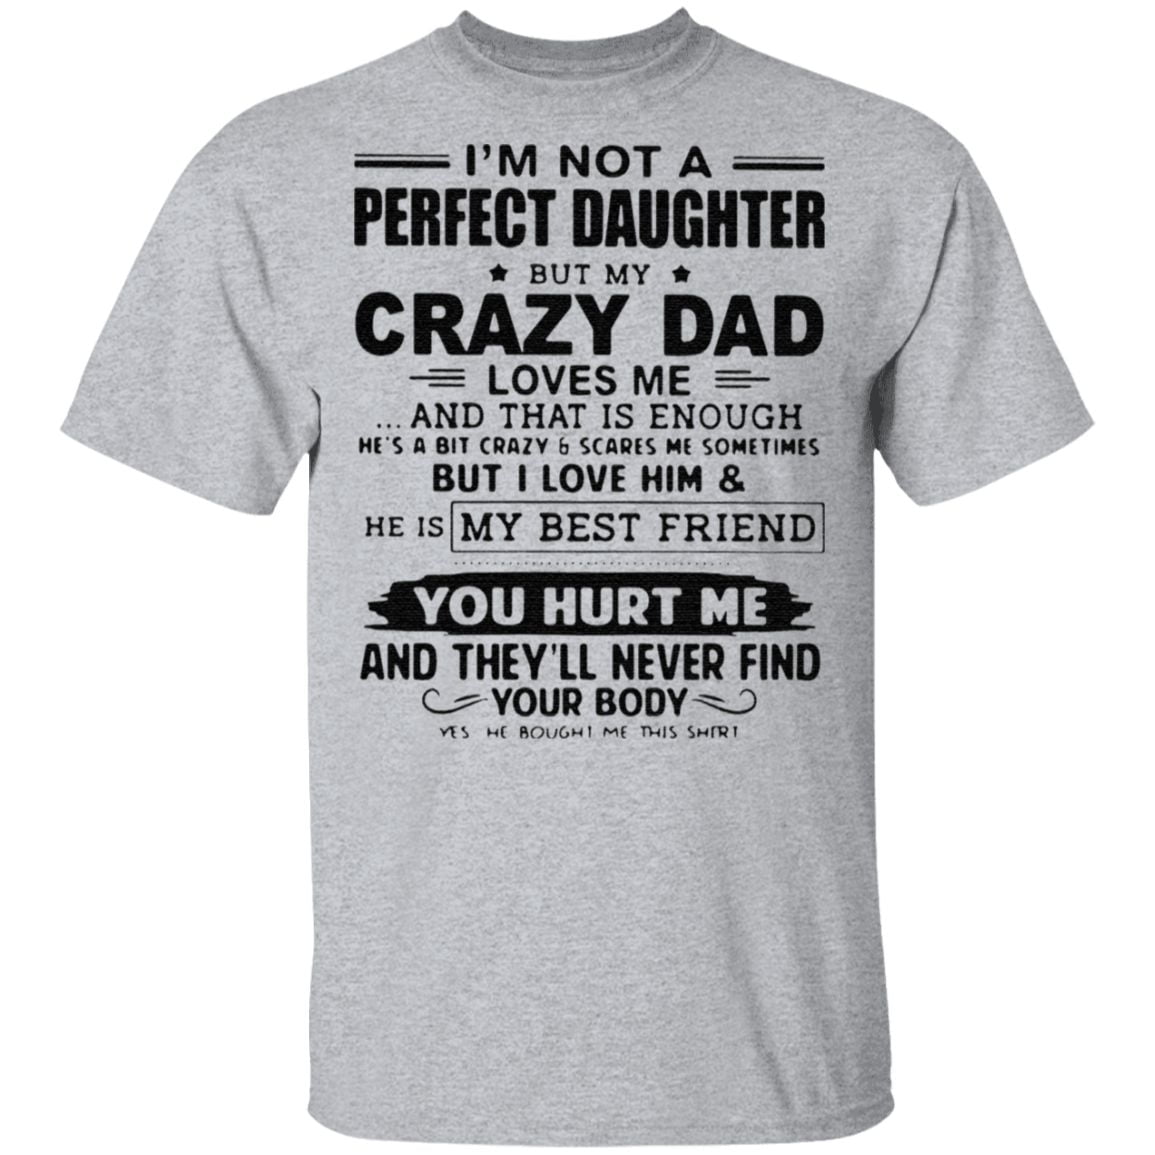 I’m Not A Perfect Daughter But My Crazy Dad Loves Me And That Is Enough T Shirt